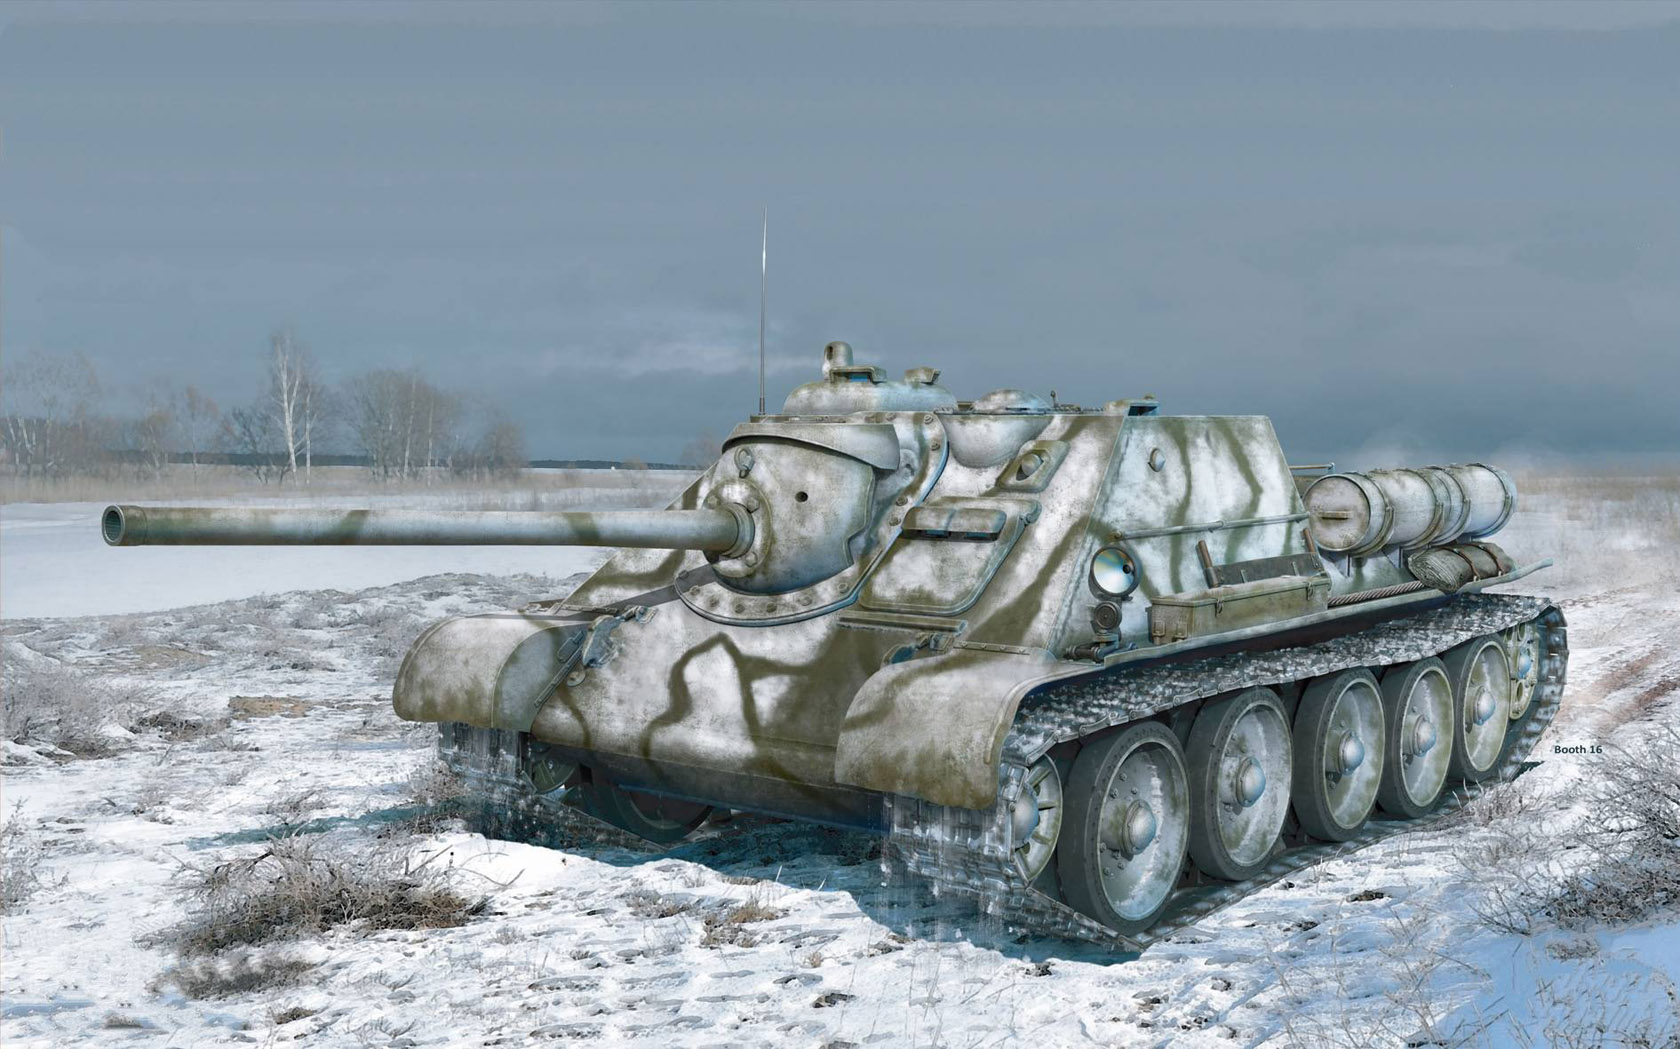 General 1680x1049 tank army military snow military vehicle artwork clouds Russian/Soviet tanks sky dead trees frontal view